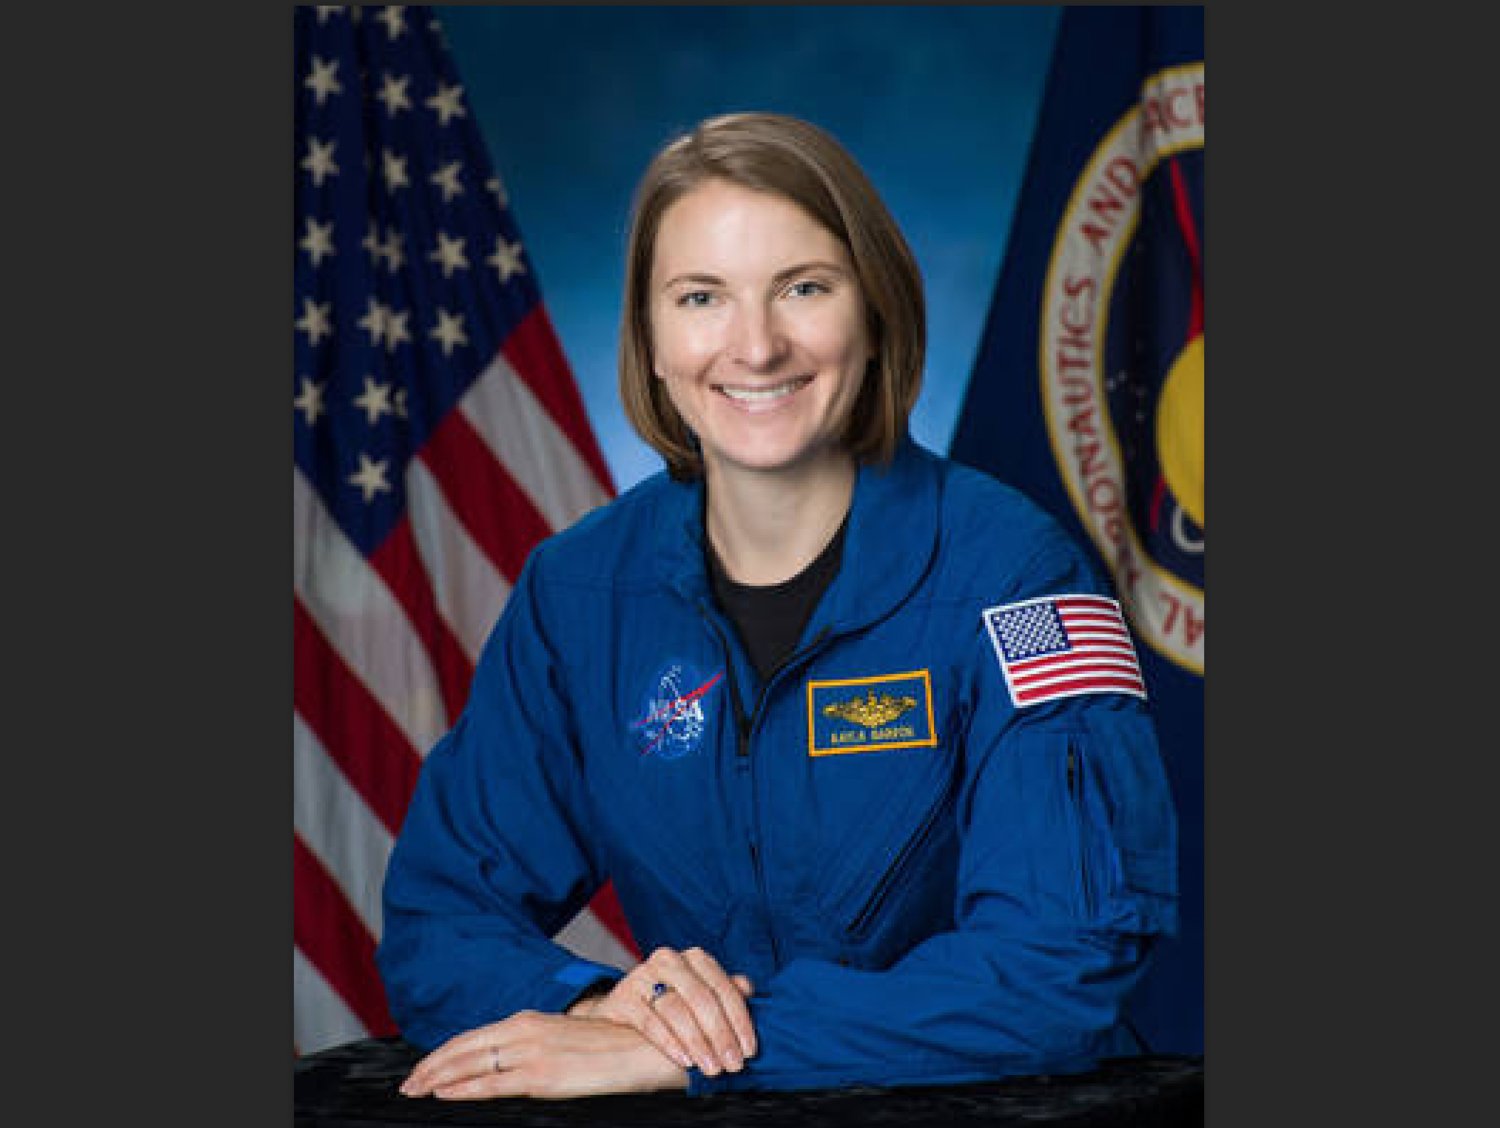 NASA astronaut Kayla Barron, from Richland, floated through the hatch of her spacecraft to board the International Space Station Thursday evening.